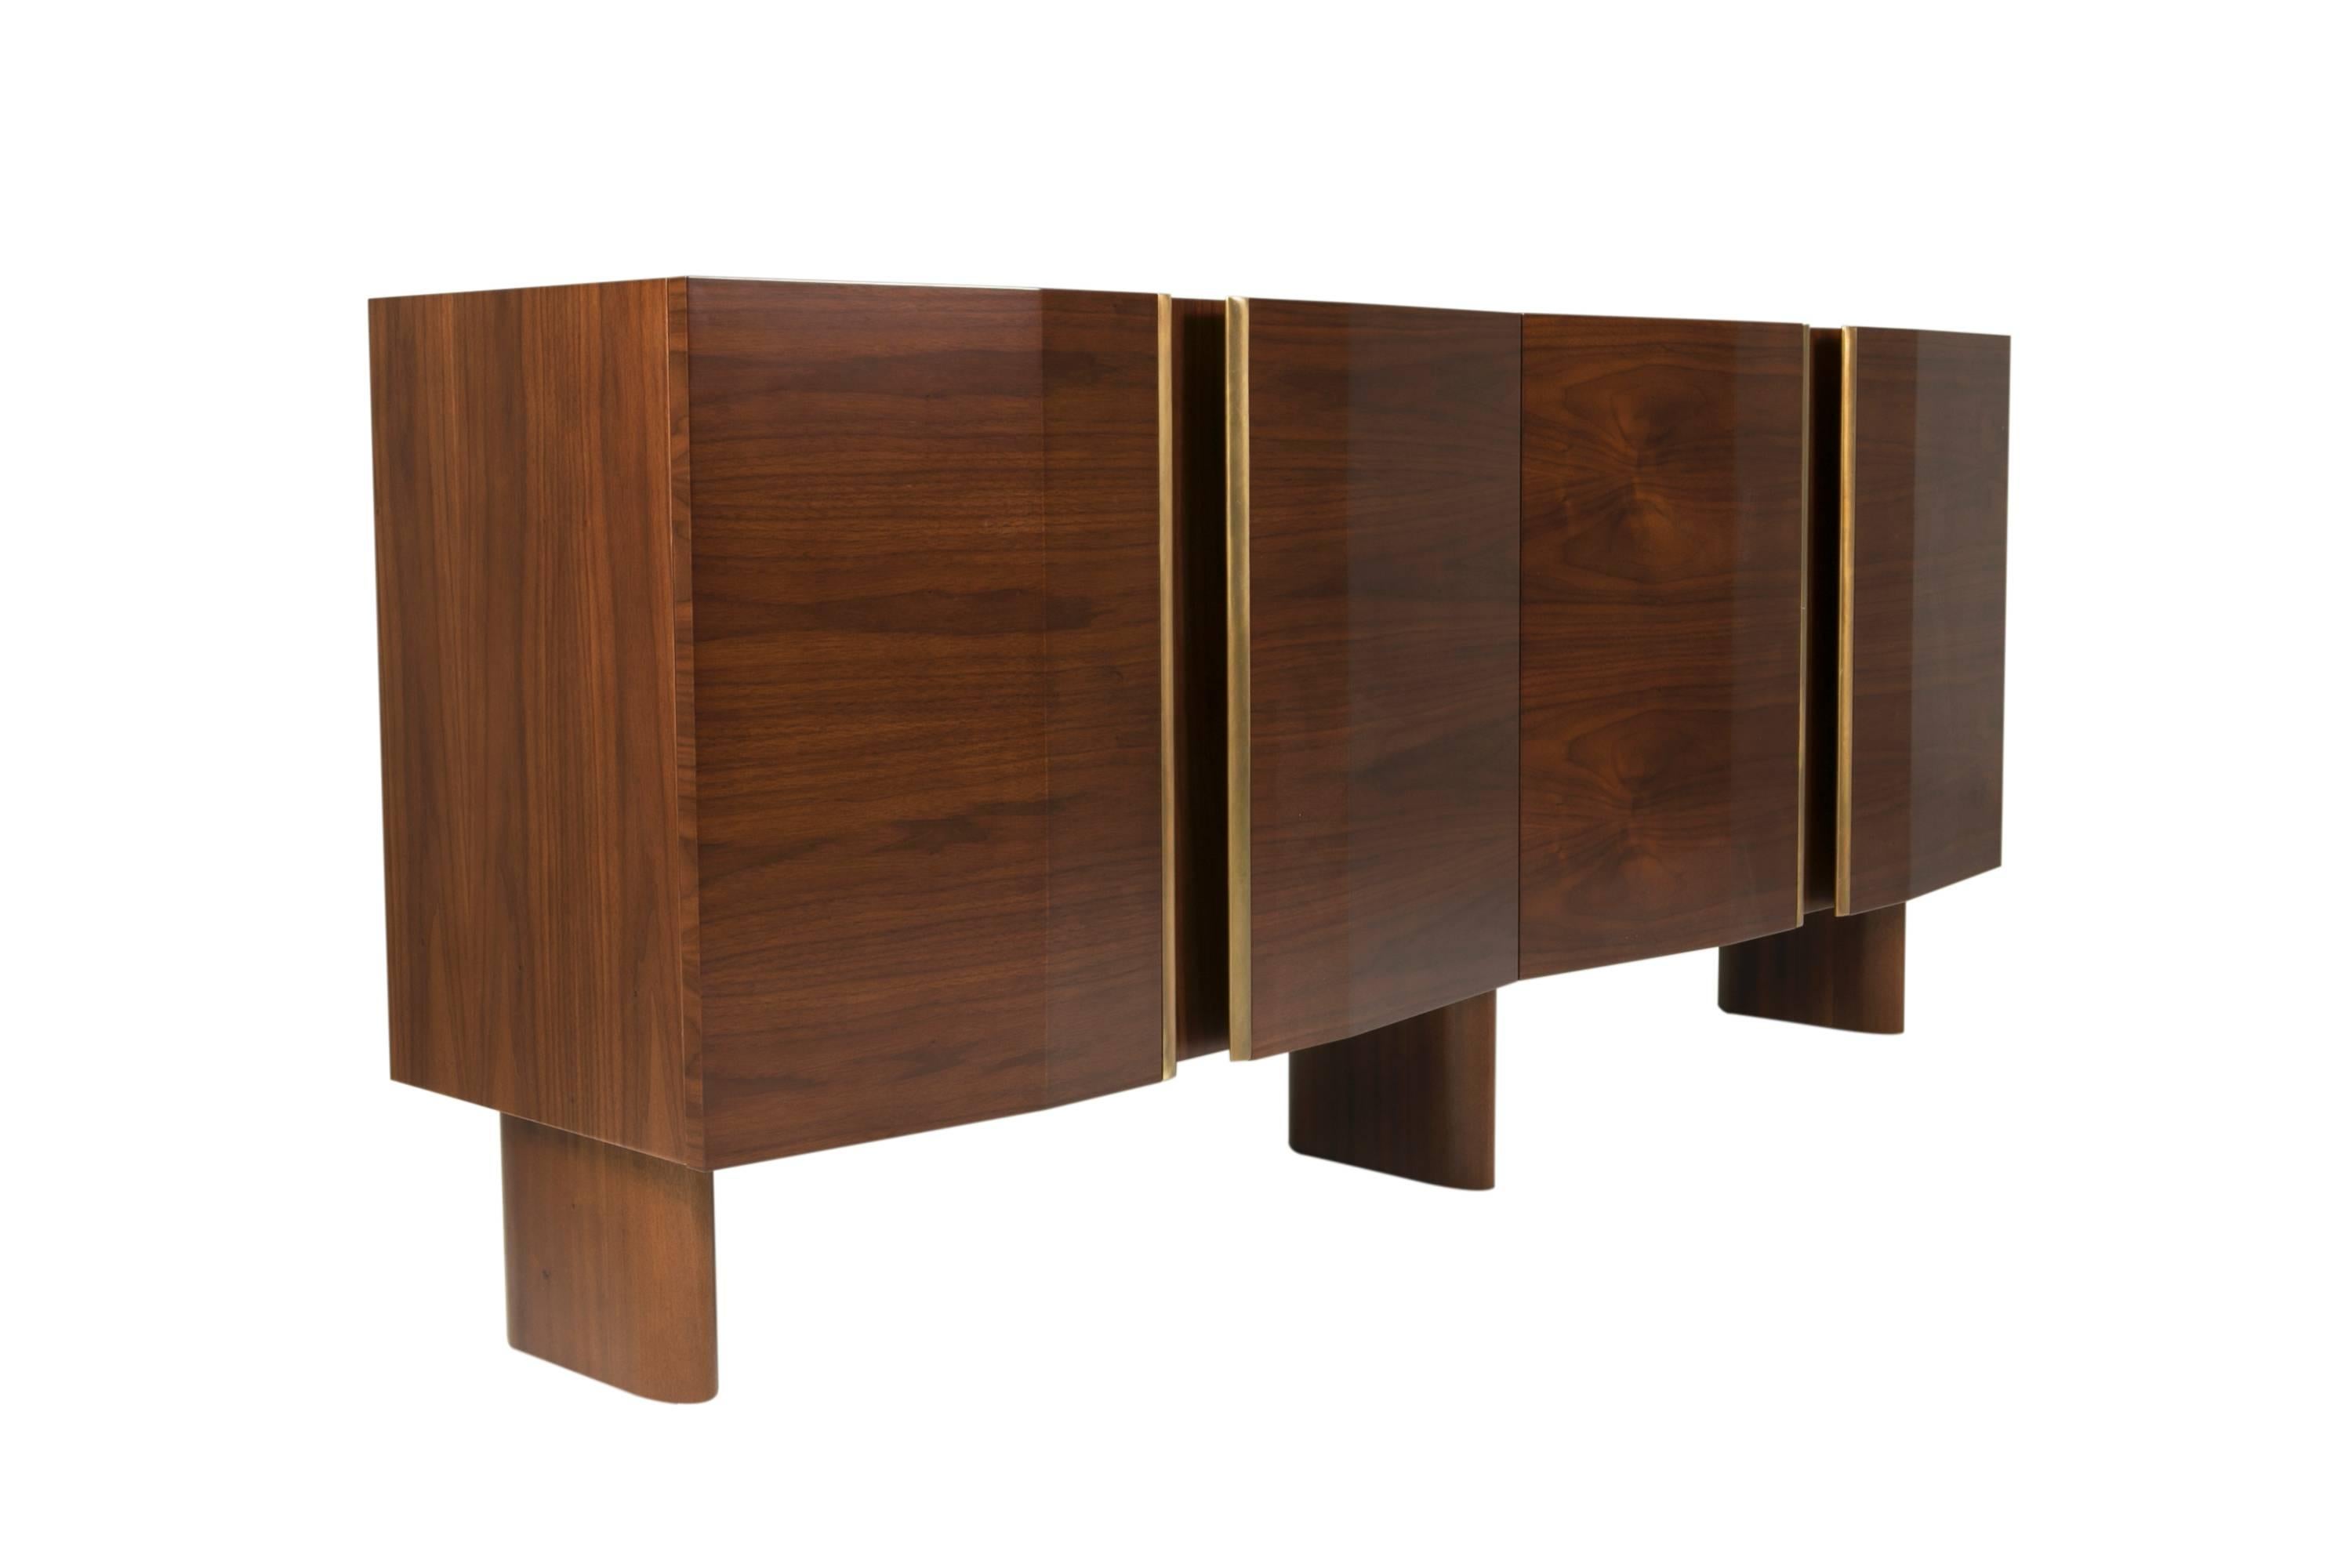 Cast Contemporary Cognac Walnut and Brass Sideboard from France